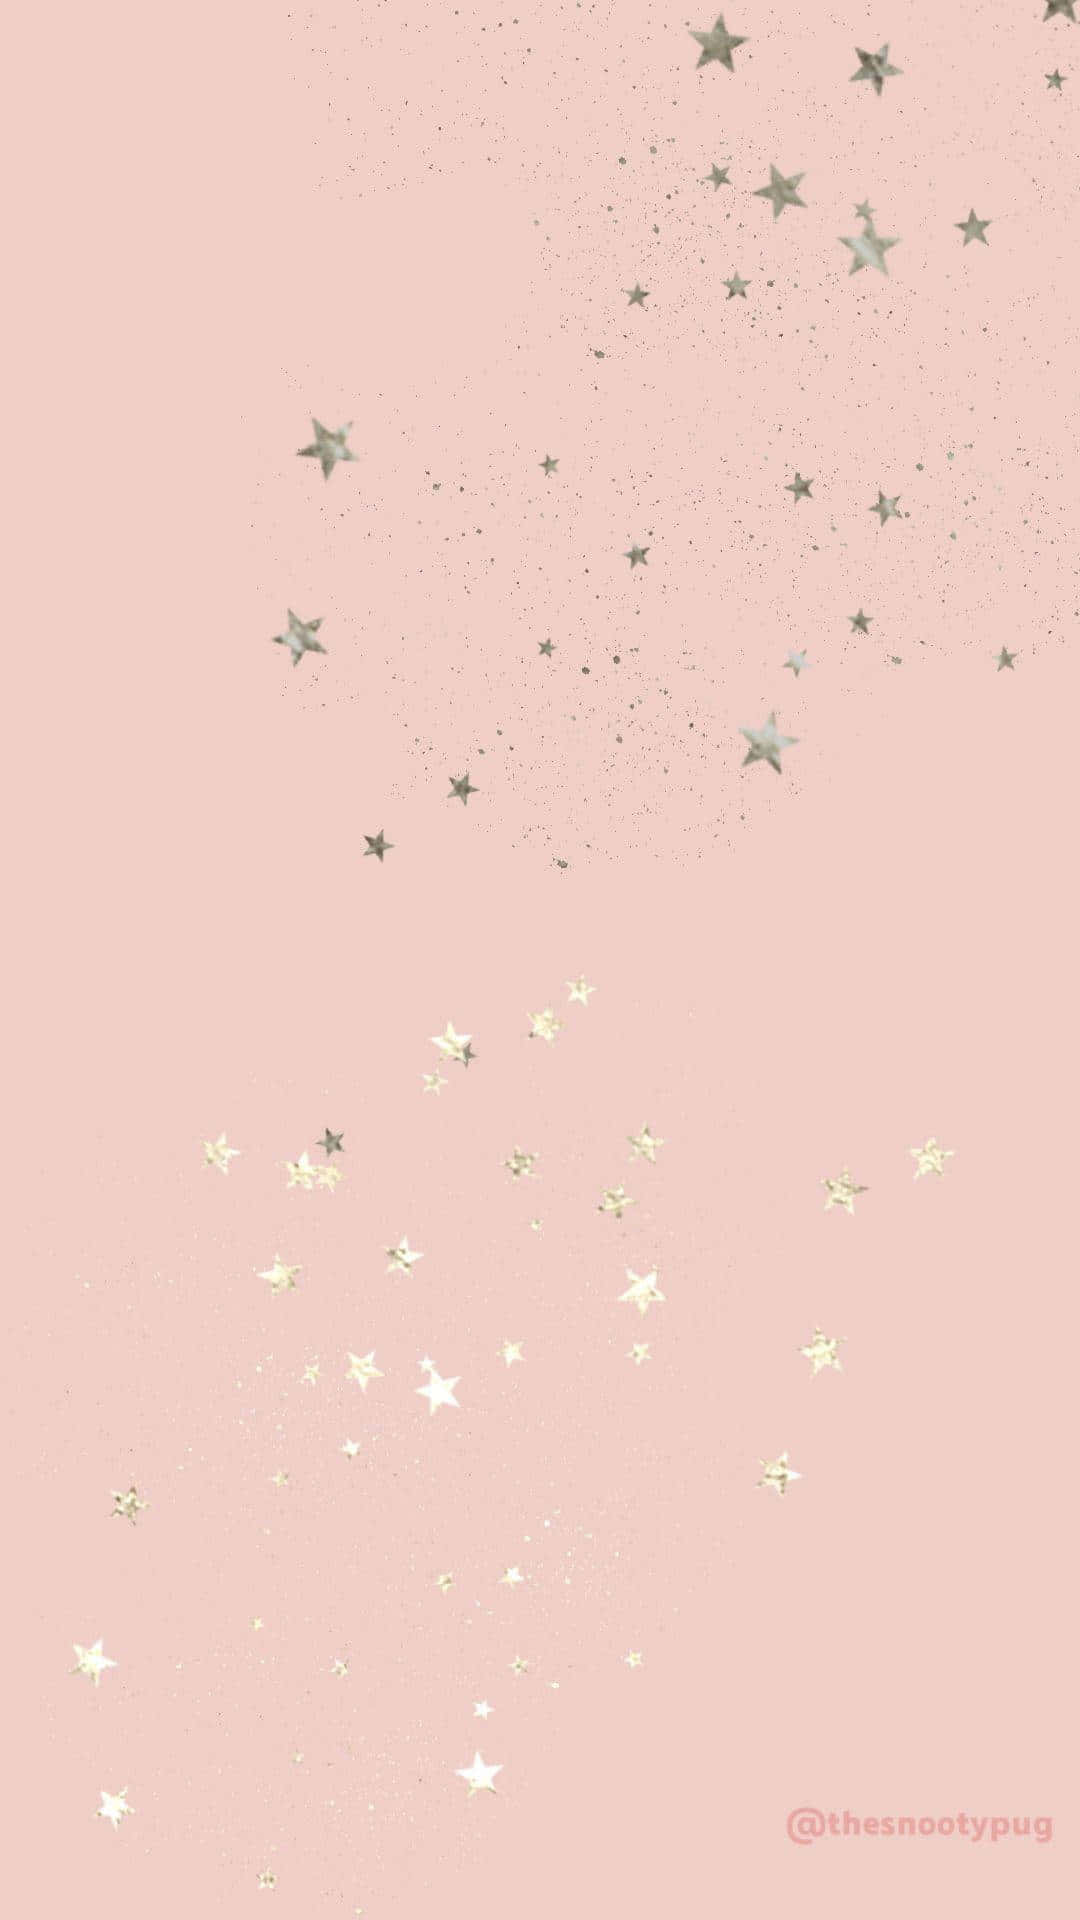 A beautiful Rose Gold aesthetic background